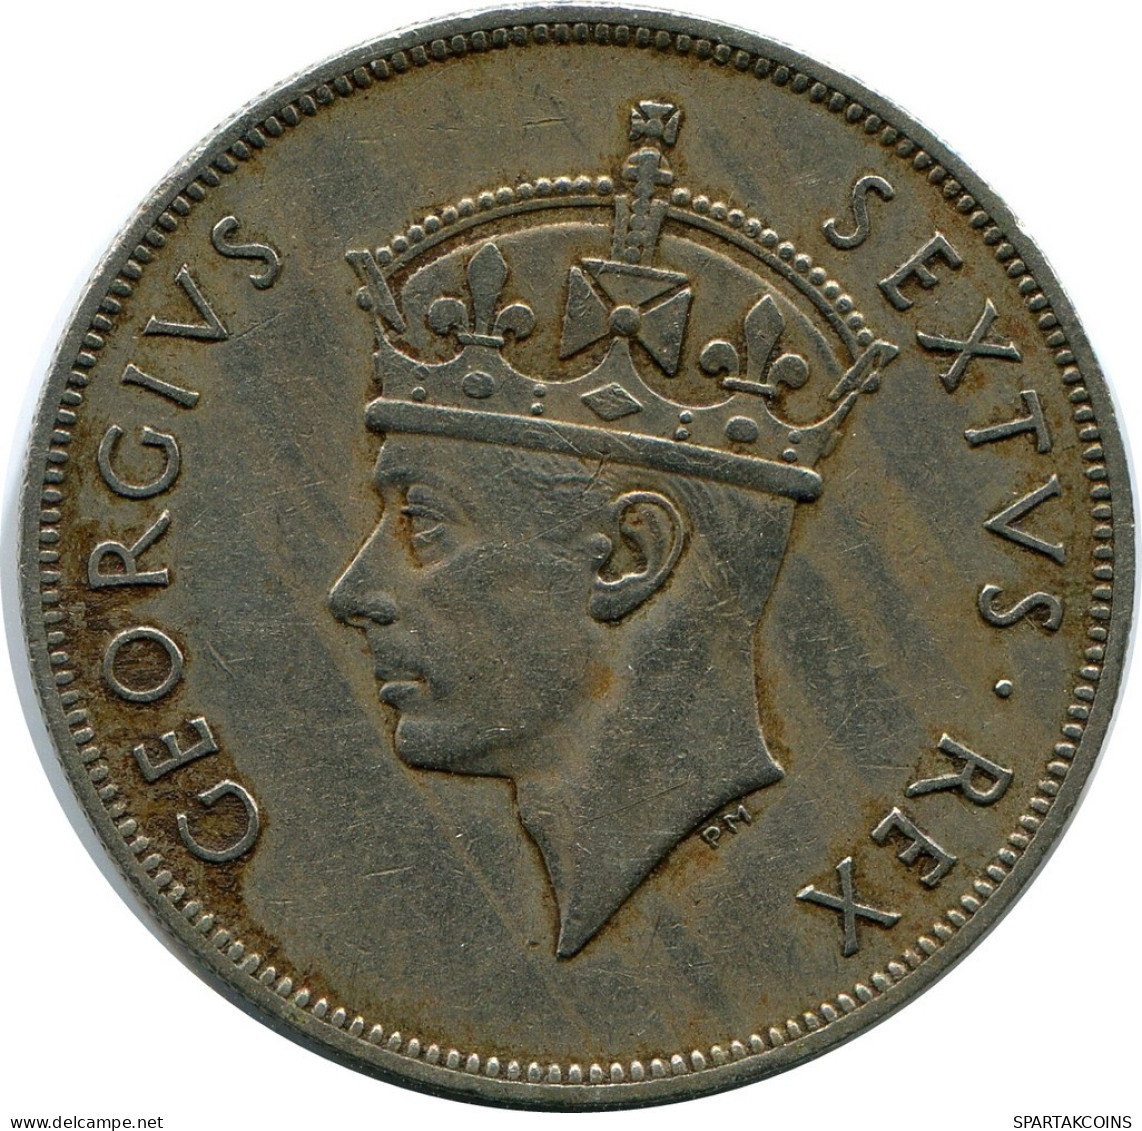 1 SHILLING 1948 EAST AFRICA Coin #AP875.U.A - Colonia Británica